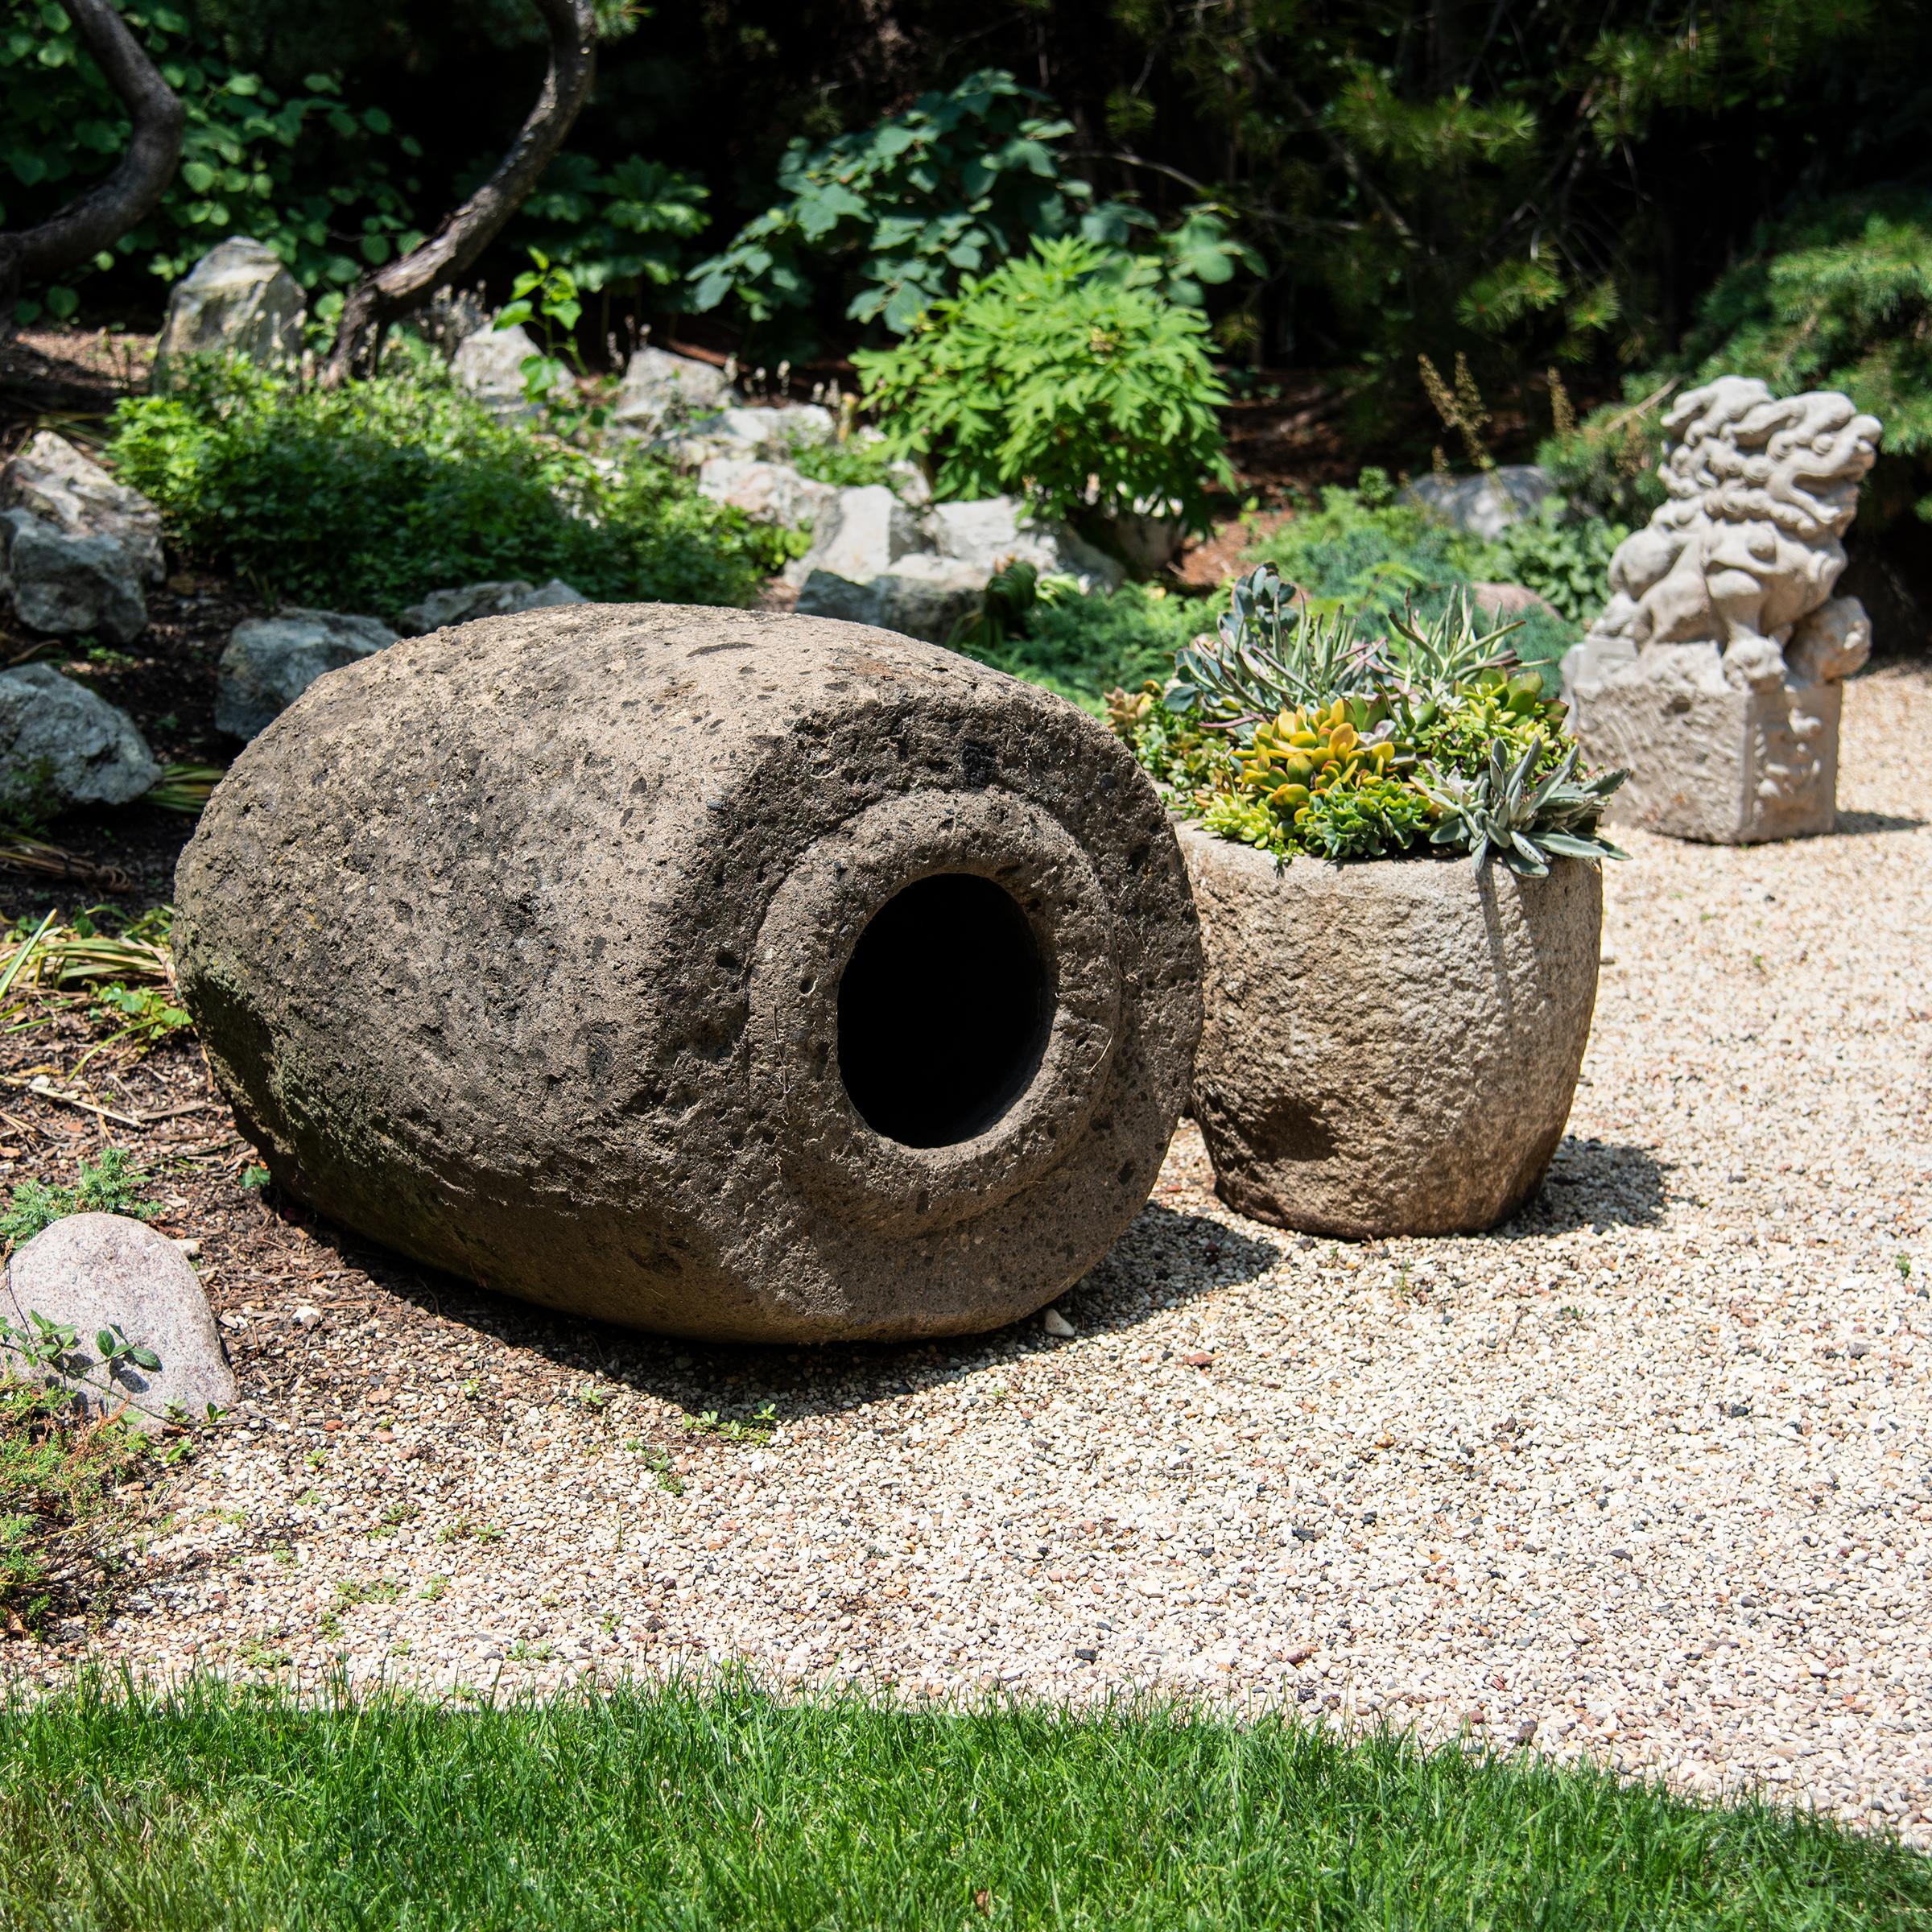 Simply shaped with an elegant form, this large limestone vessel is actually a runner stone, a key component to a traditional Chinese grain mill. Set atop an extensively carved mill stone, the runner stone was harnessed to a donkey or mule that